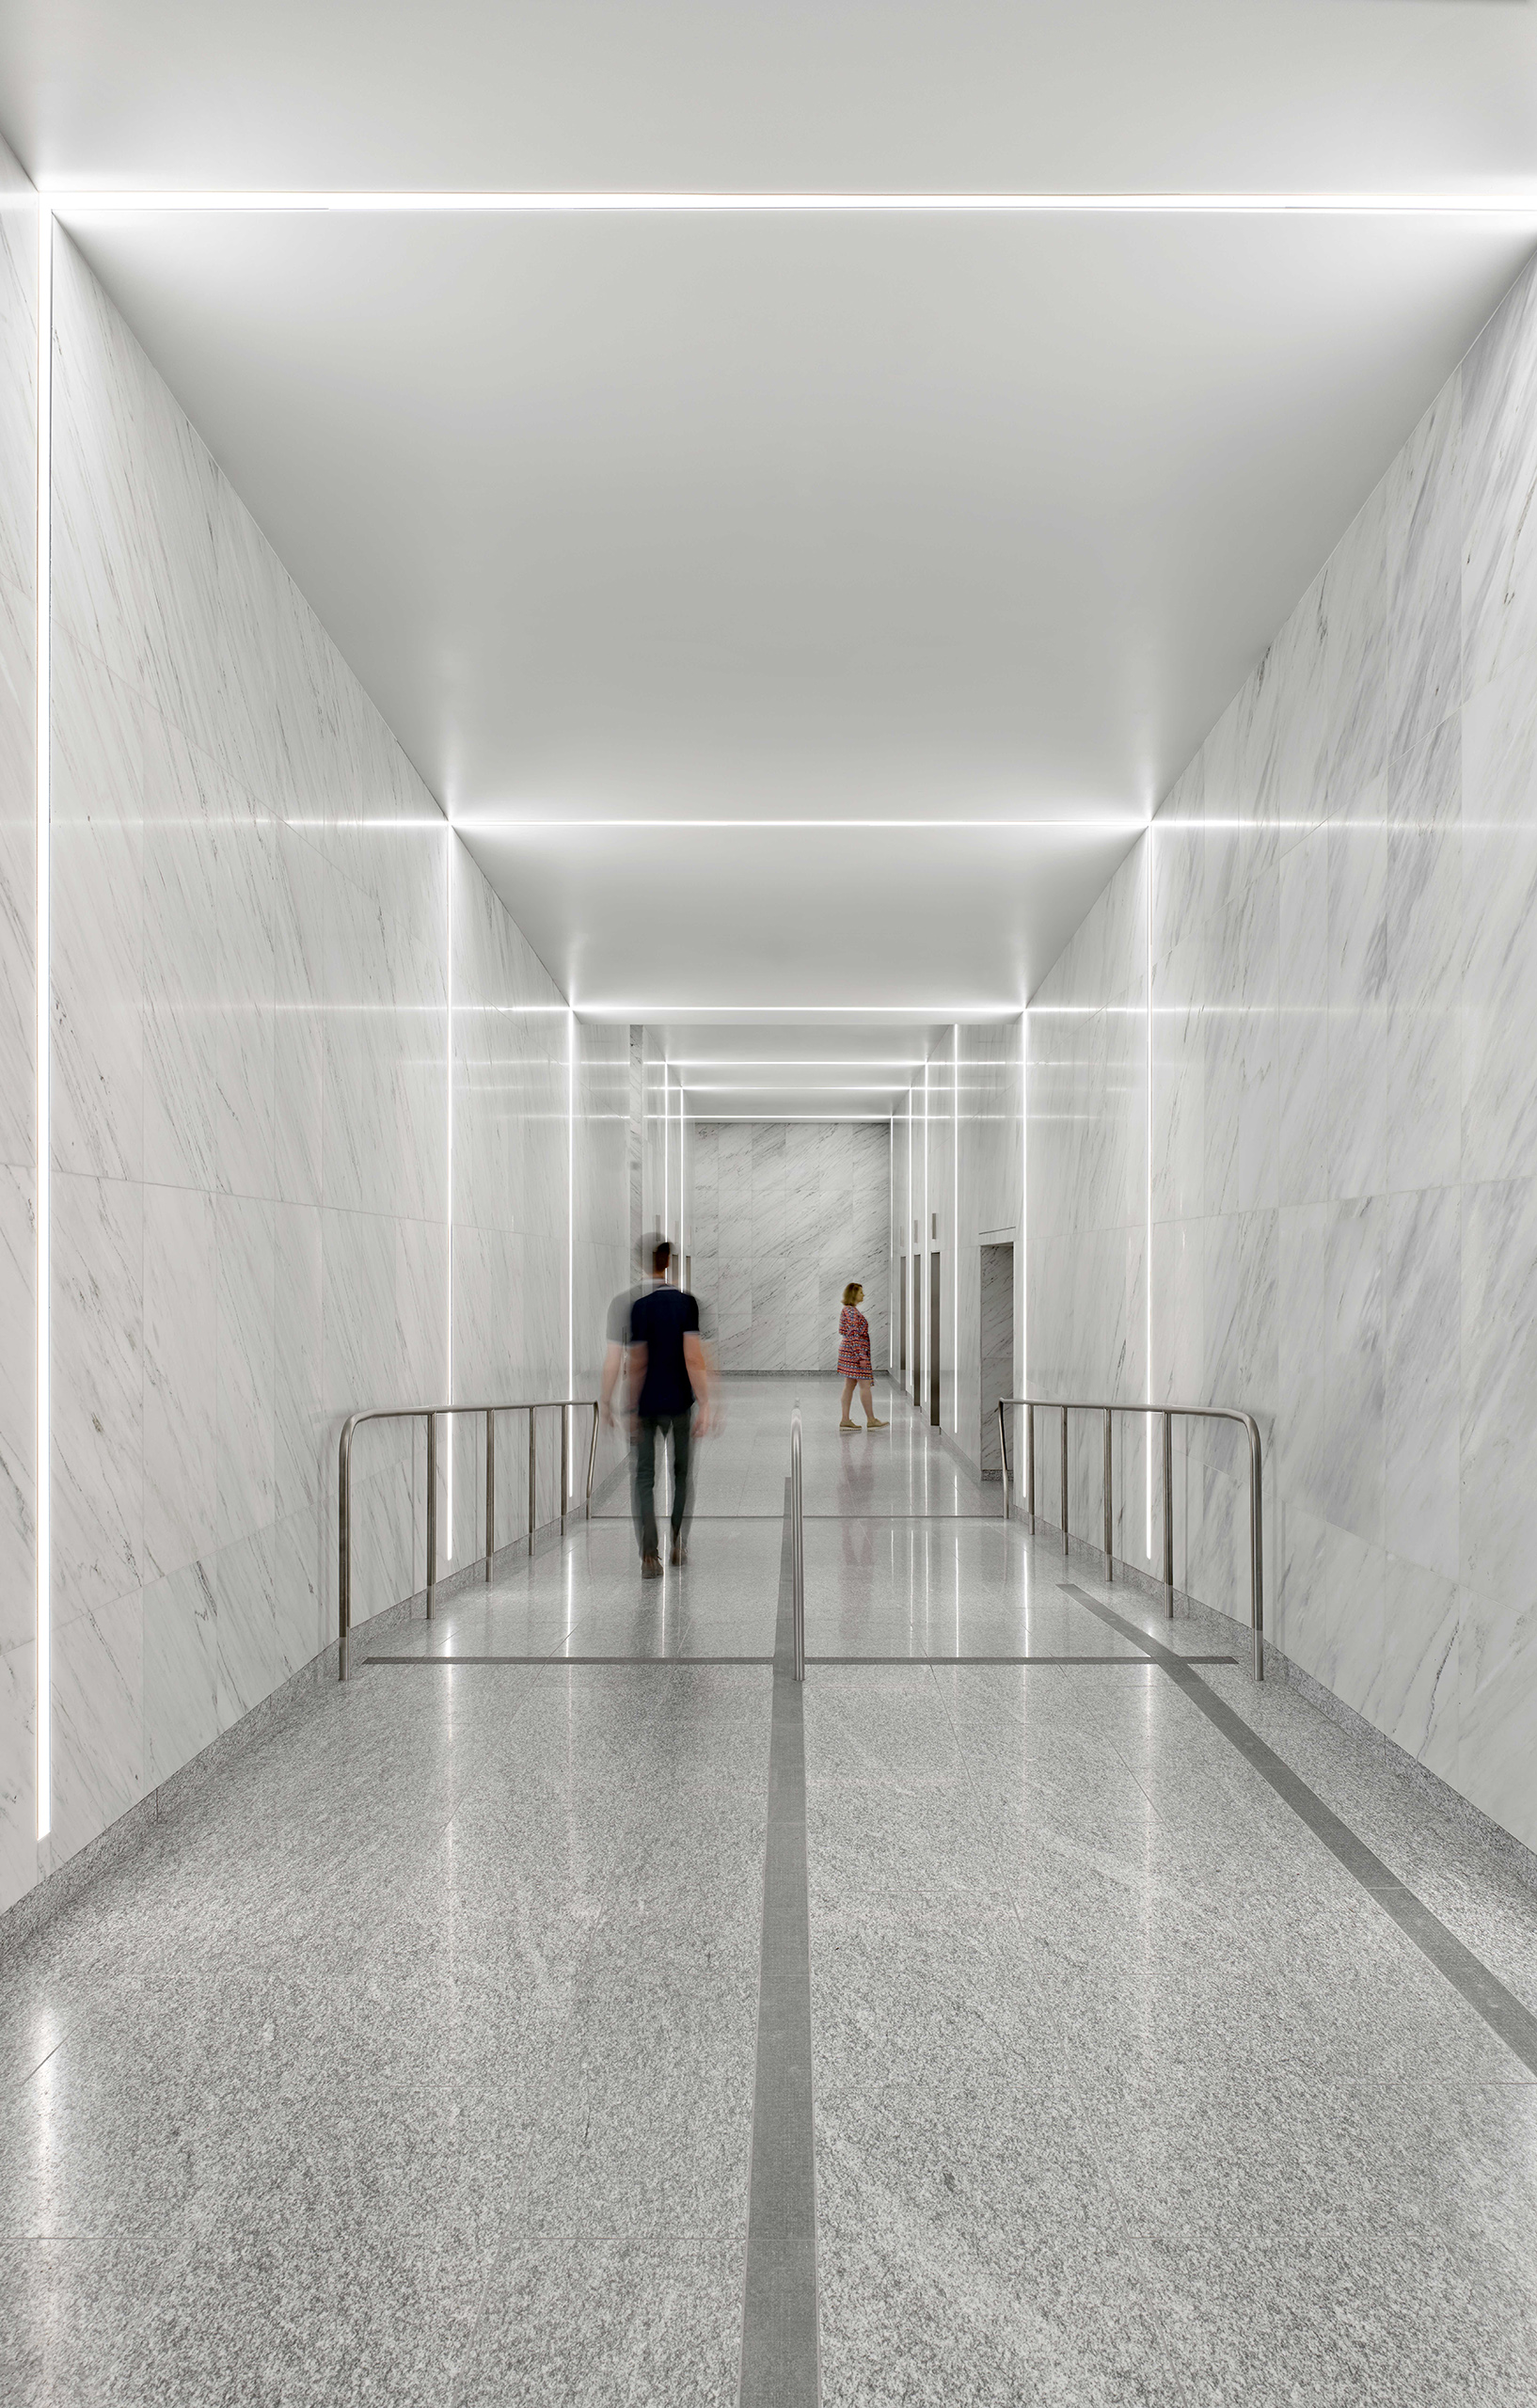 Interior lights illuminate the corridor, where two individuals are walking away from the main perspective. The white marble walls are illuminated by the lighting, creating a bright white interior space.